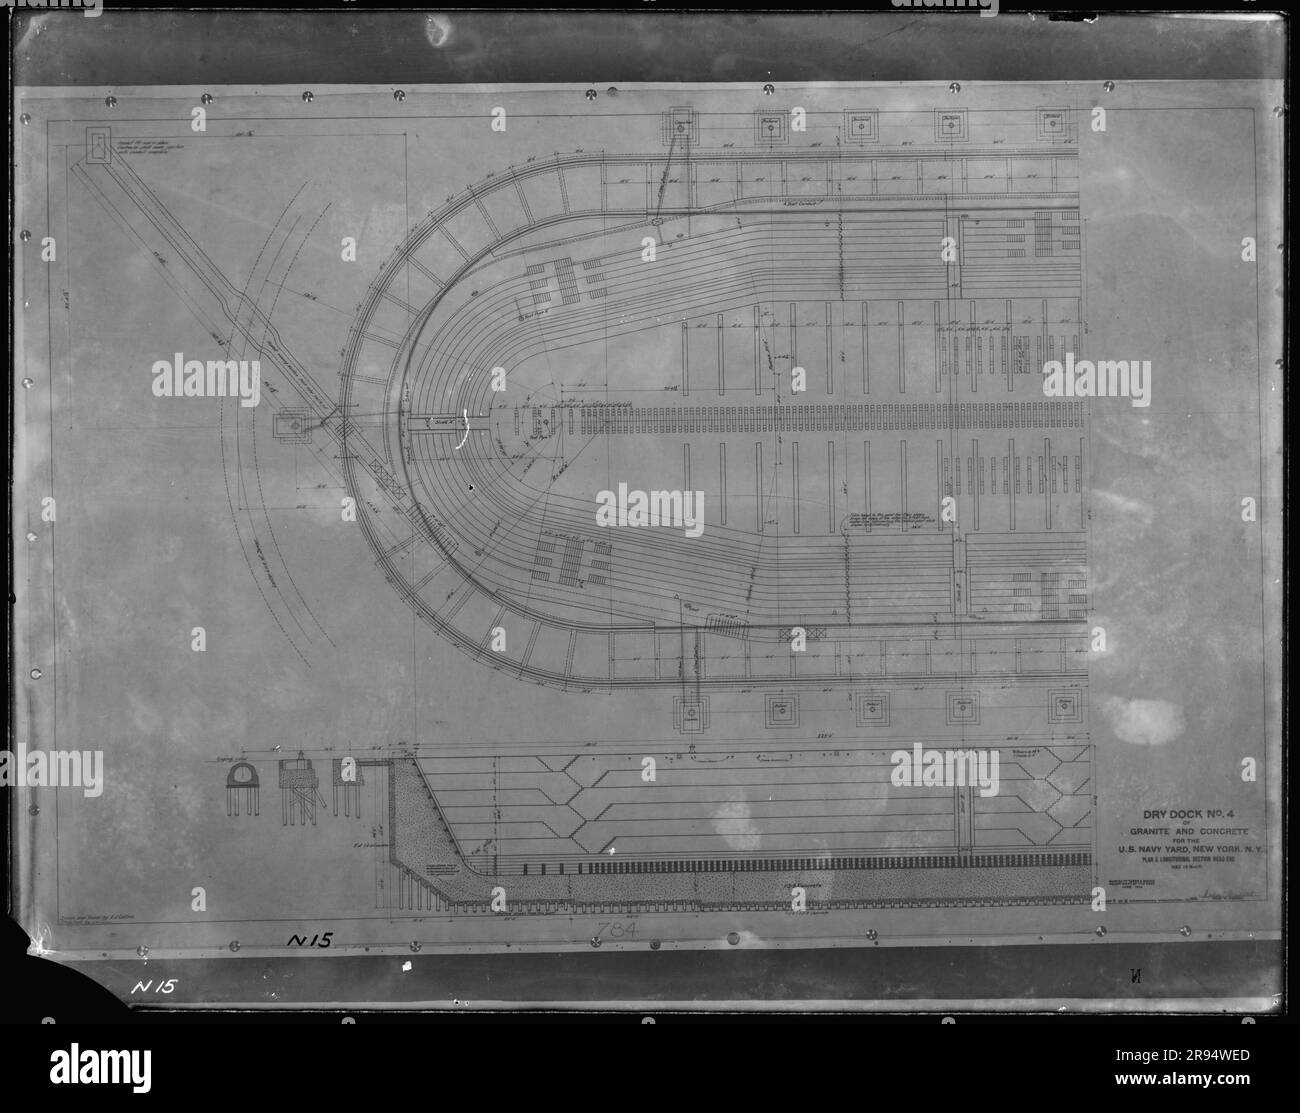 Drawing: Dry Dock Number 4, Granite and Concrete for the U. S. Navy Yard, New York, New York, Plan and Longitudinal Section Head End. Glass Plate Negatives of the Construction and Repair of Buildings, Facilities, and Vessels at the New York Navy Yard. Stock Photo